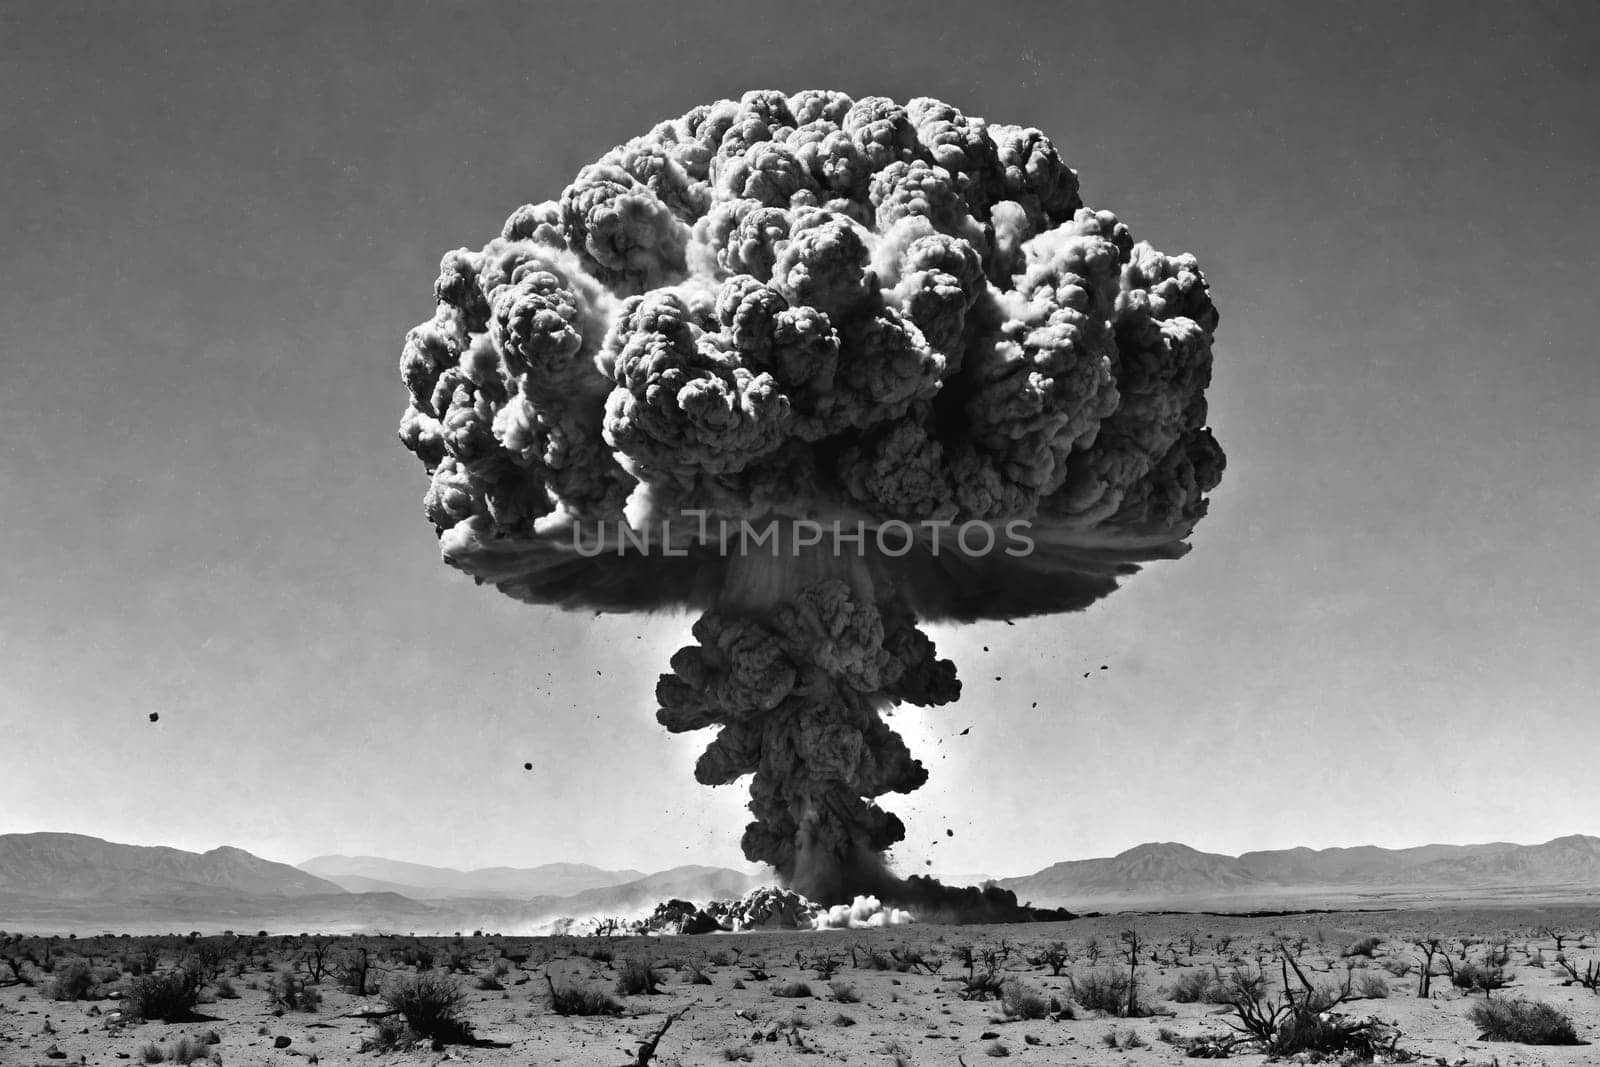 Iconic monochrome image showing the terrifying beauty of a nuclear detonation.